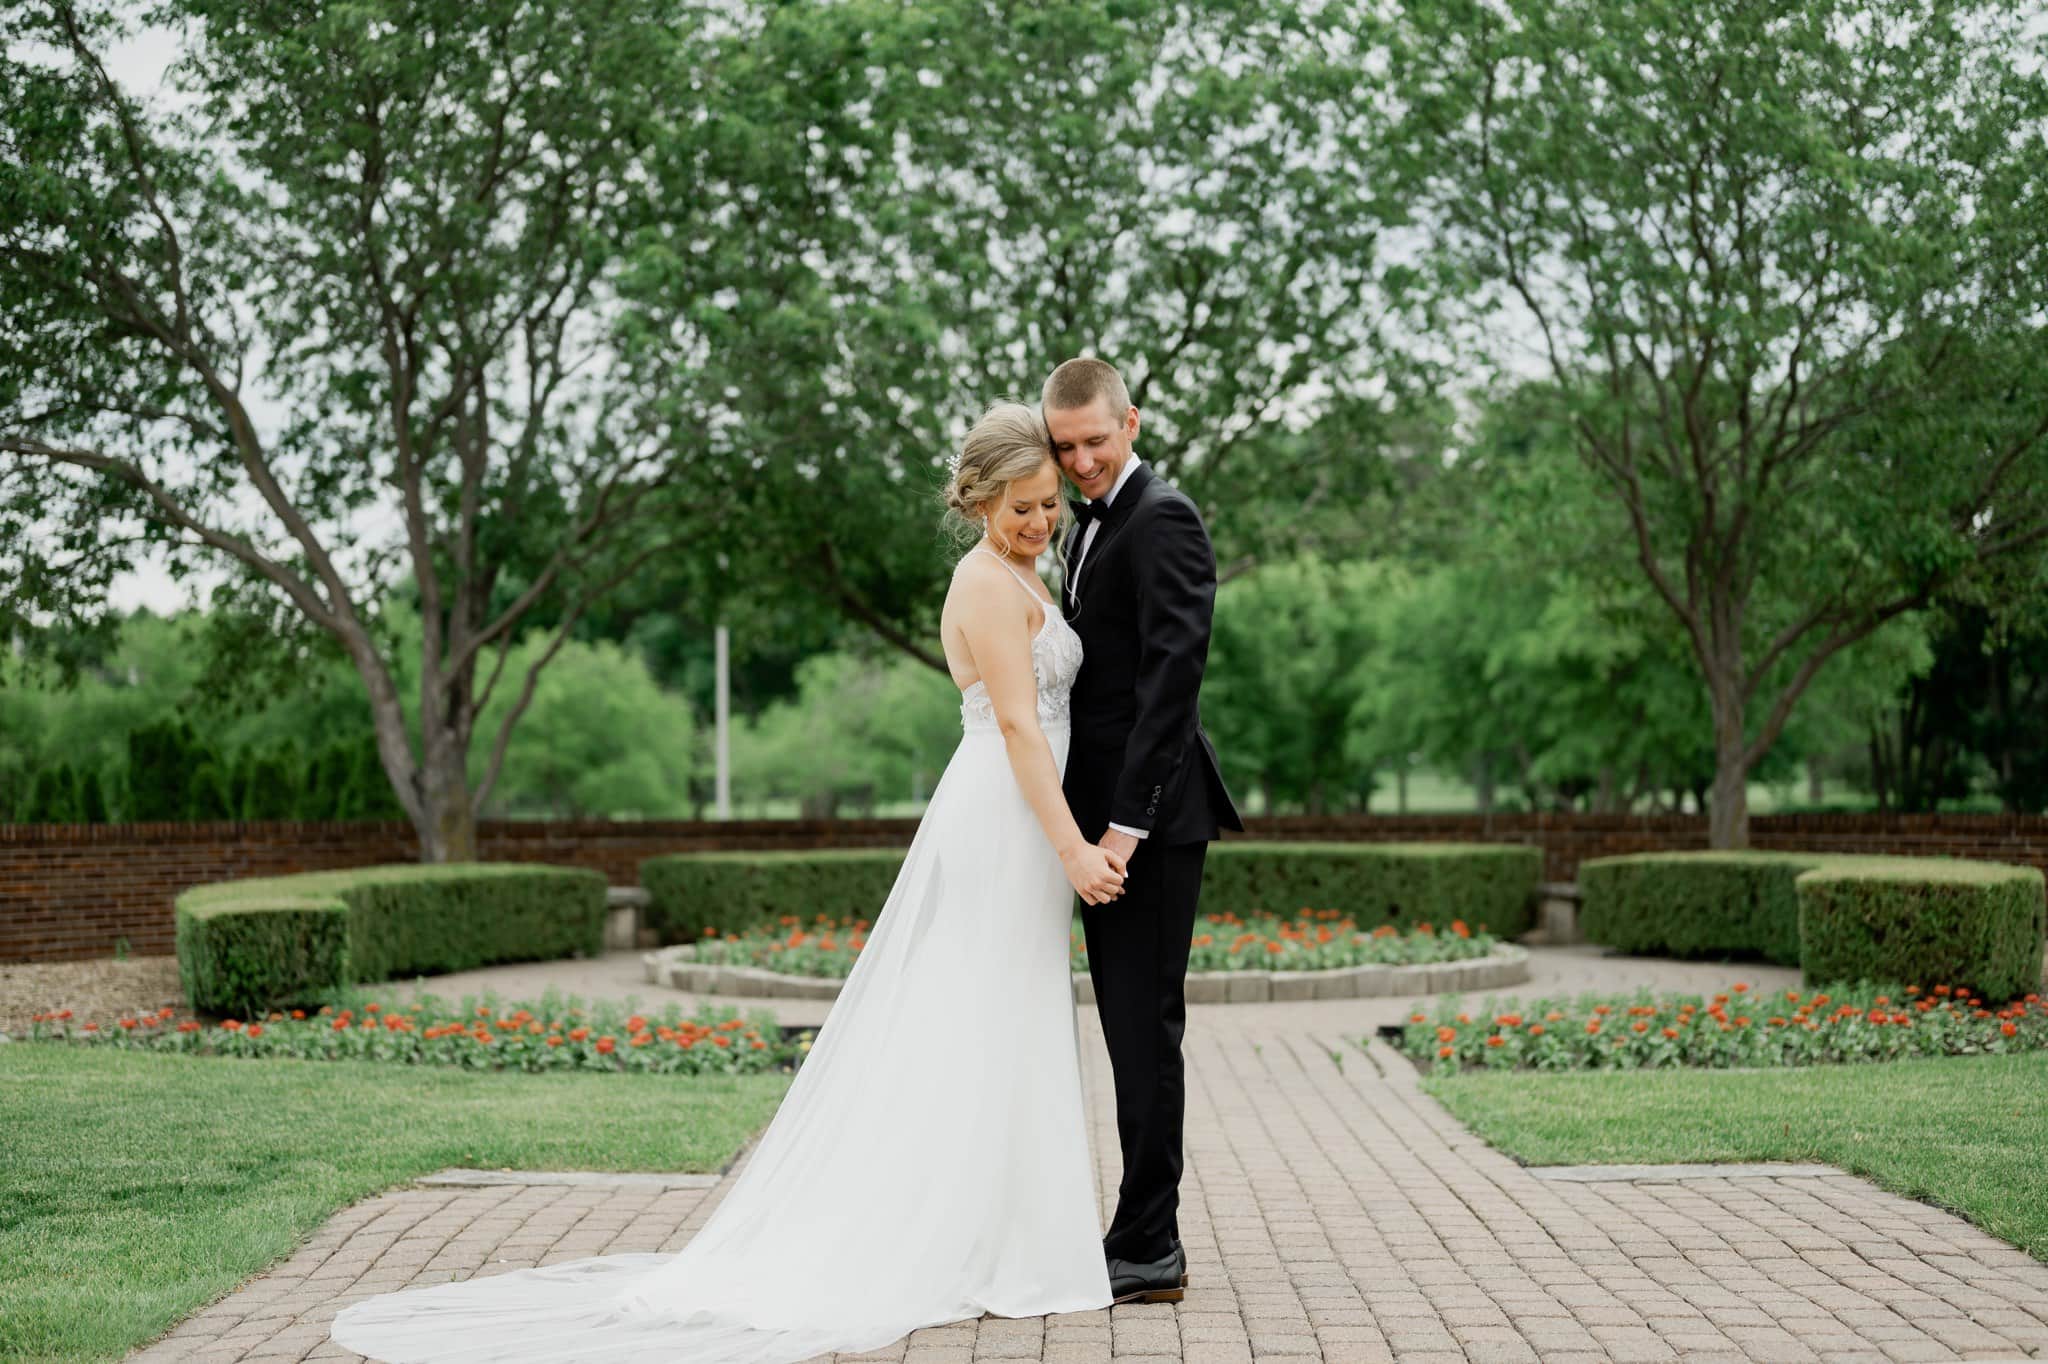 Des Moines Golf and Country Club wedding photographer